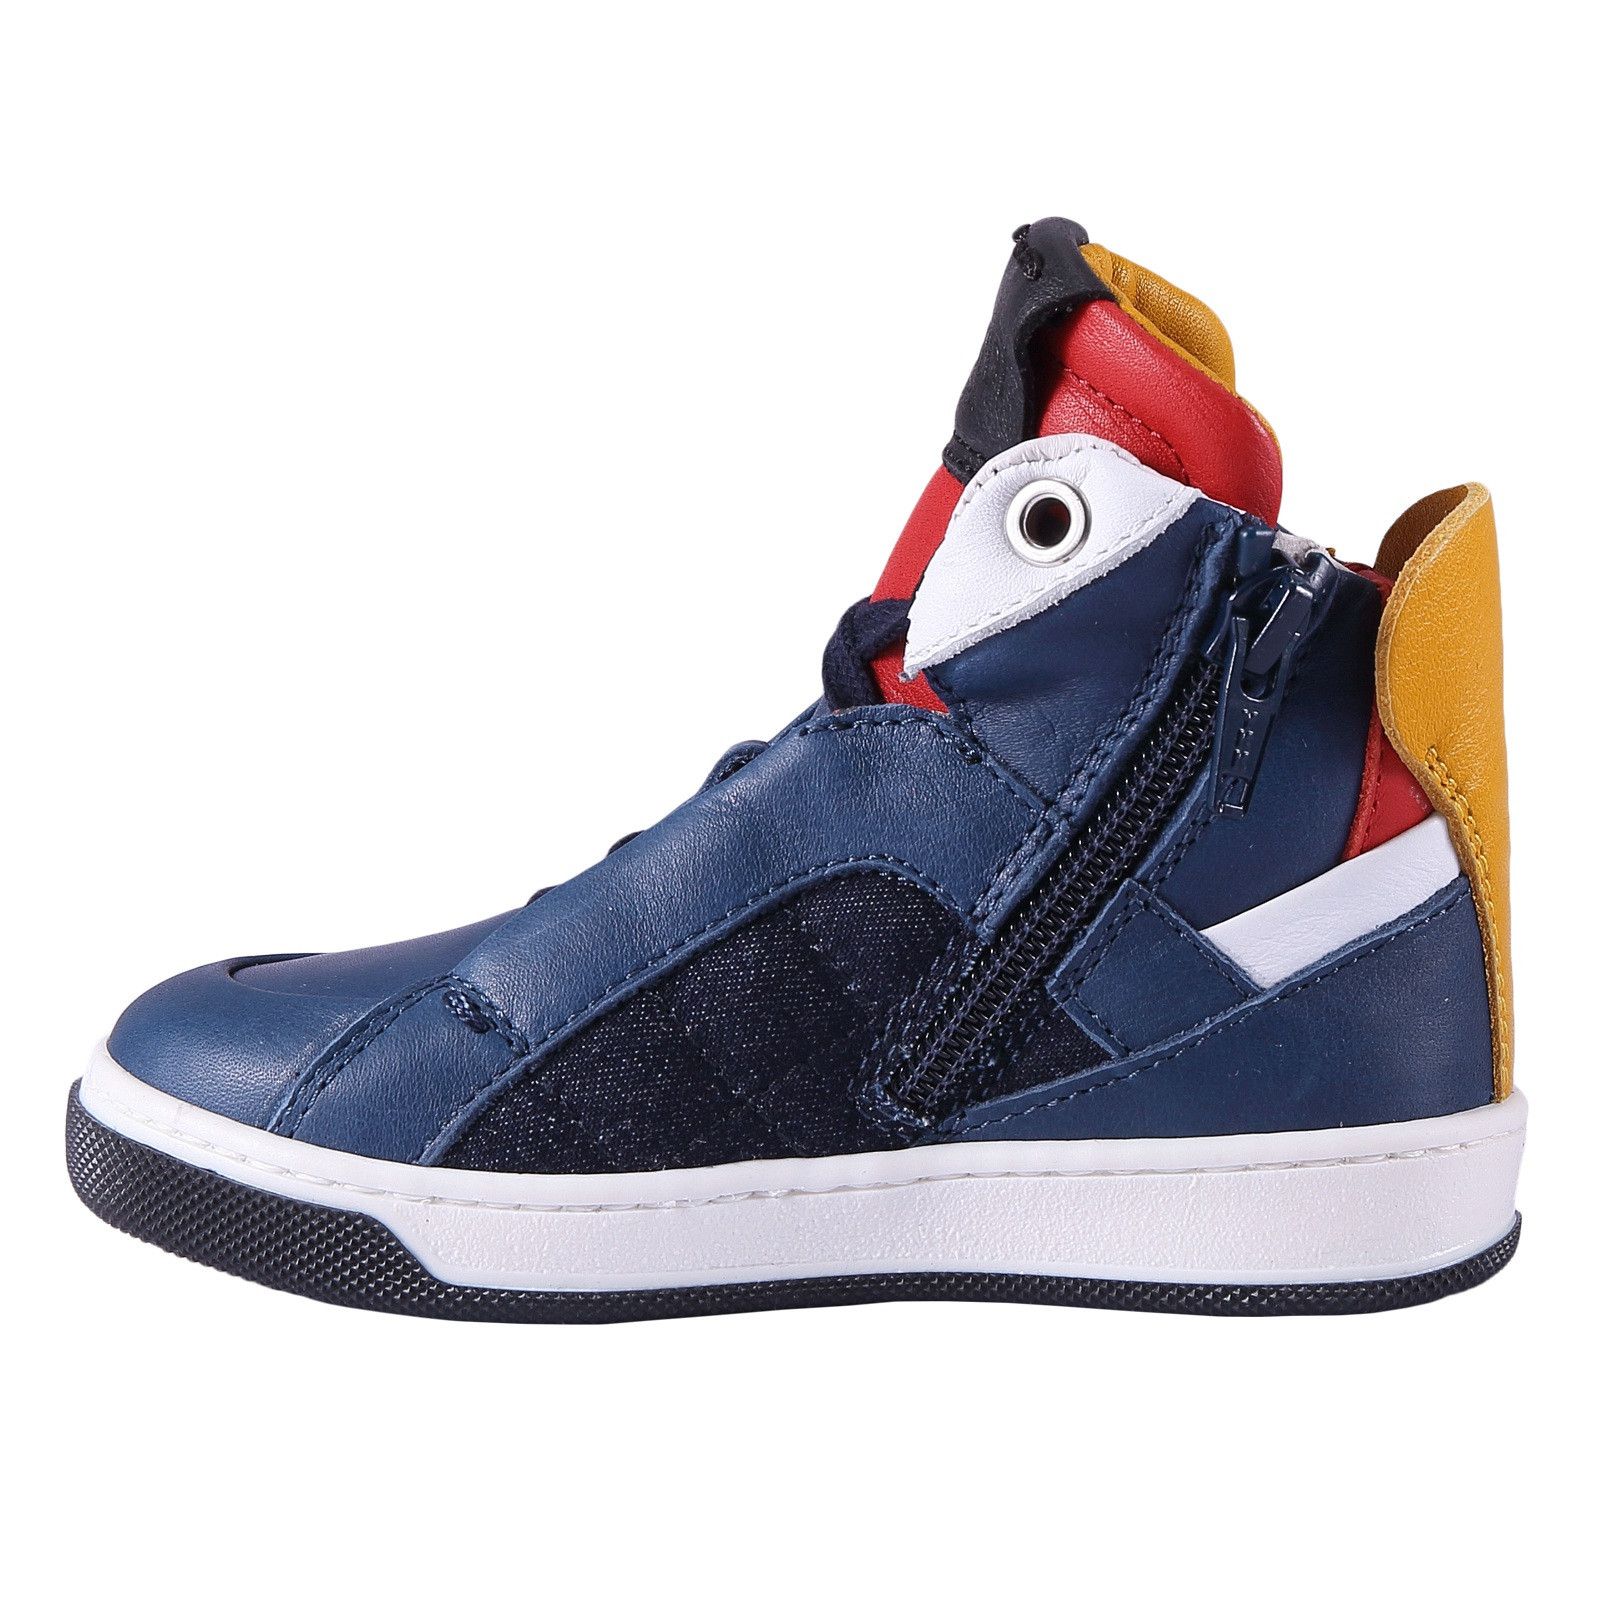 Boys Blue 'Monster' Leather High-Top Trainers - CÉMAROSE | Children's Fashion Store - 3